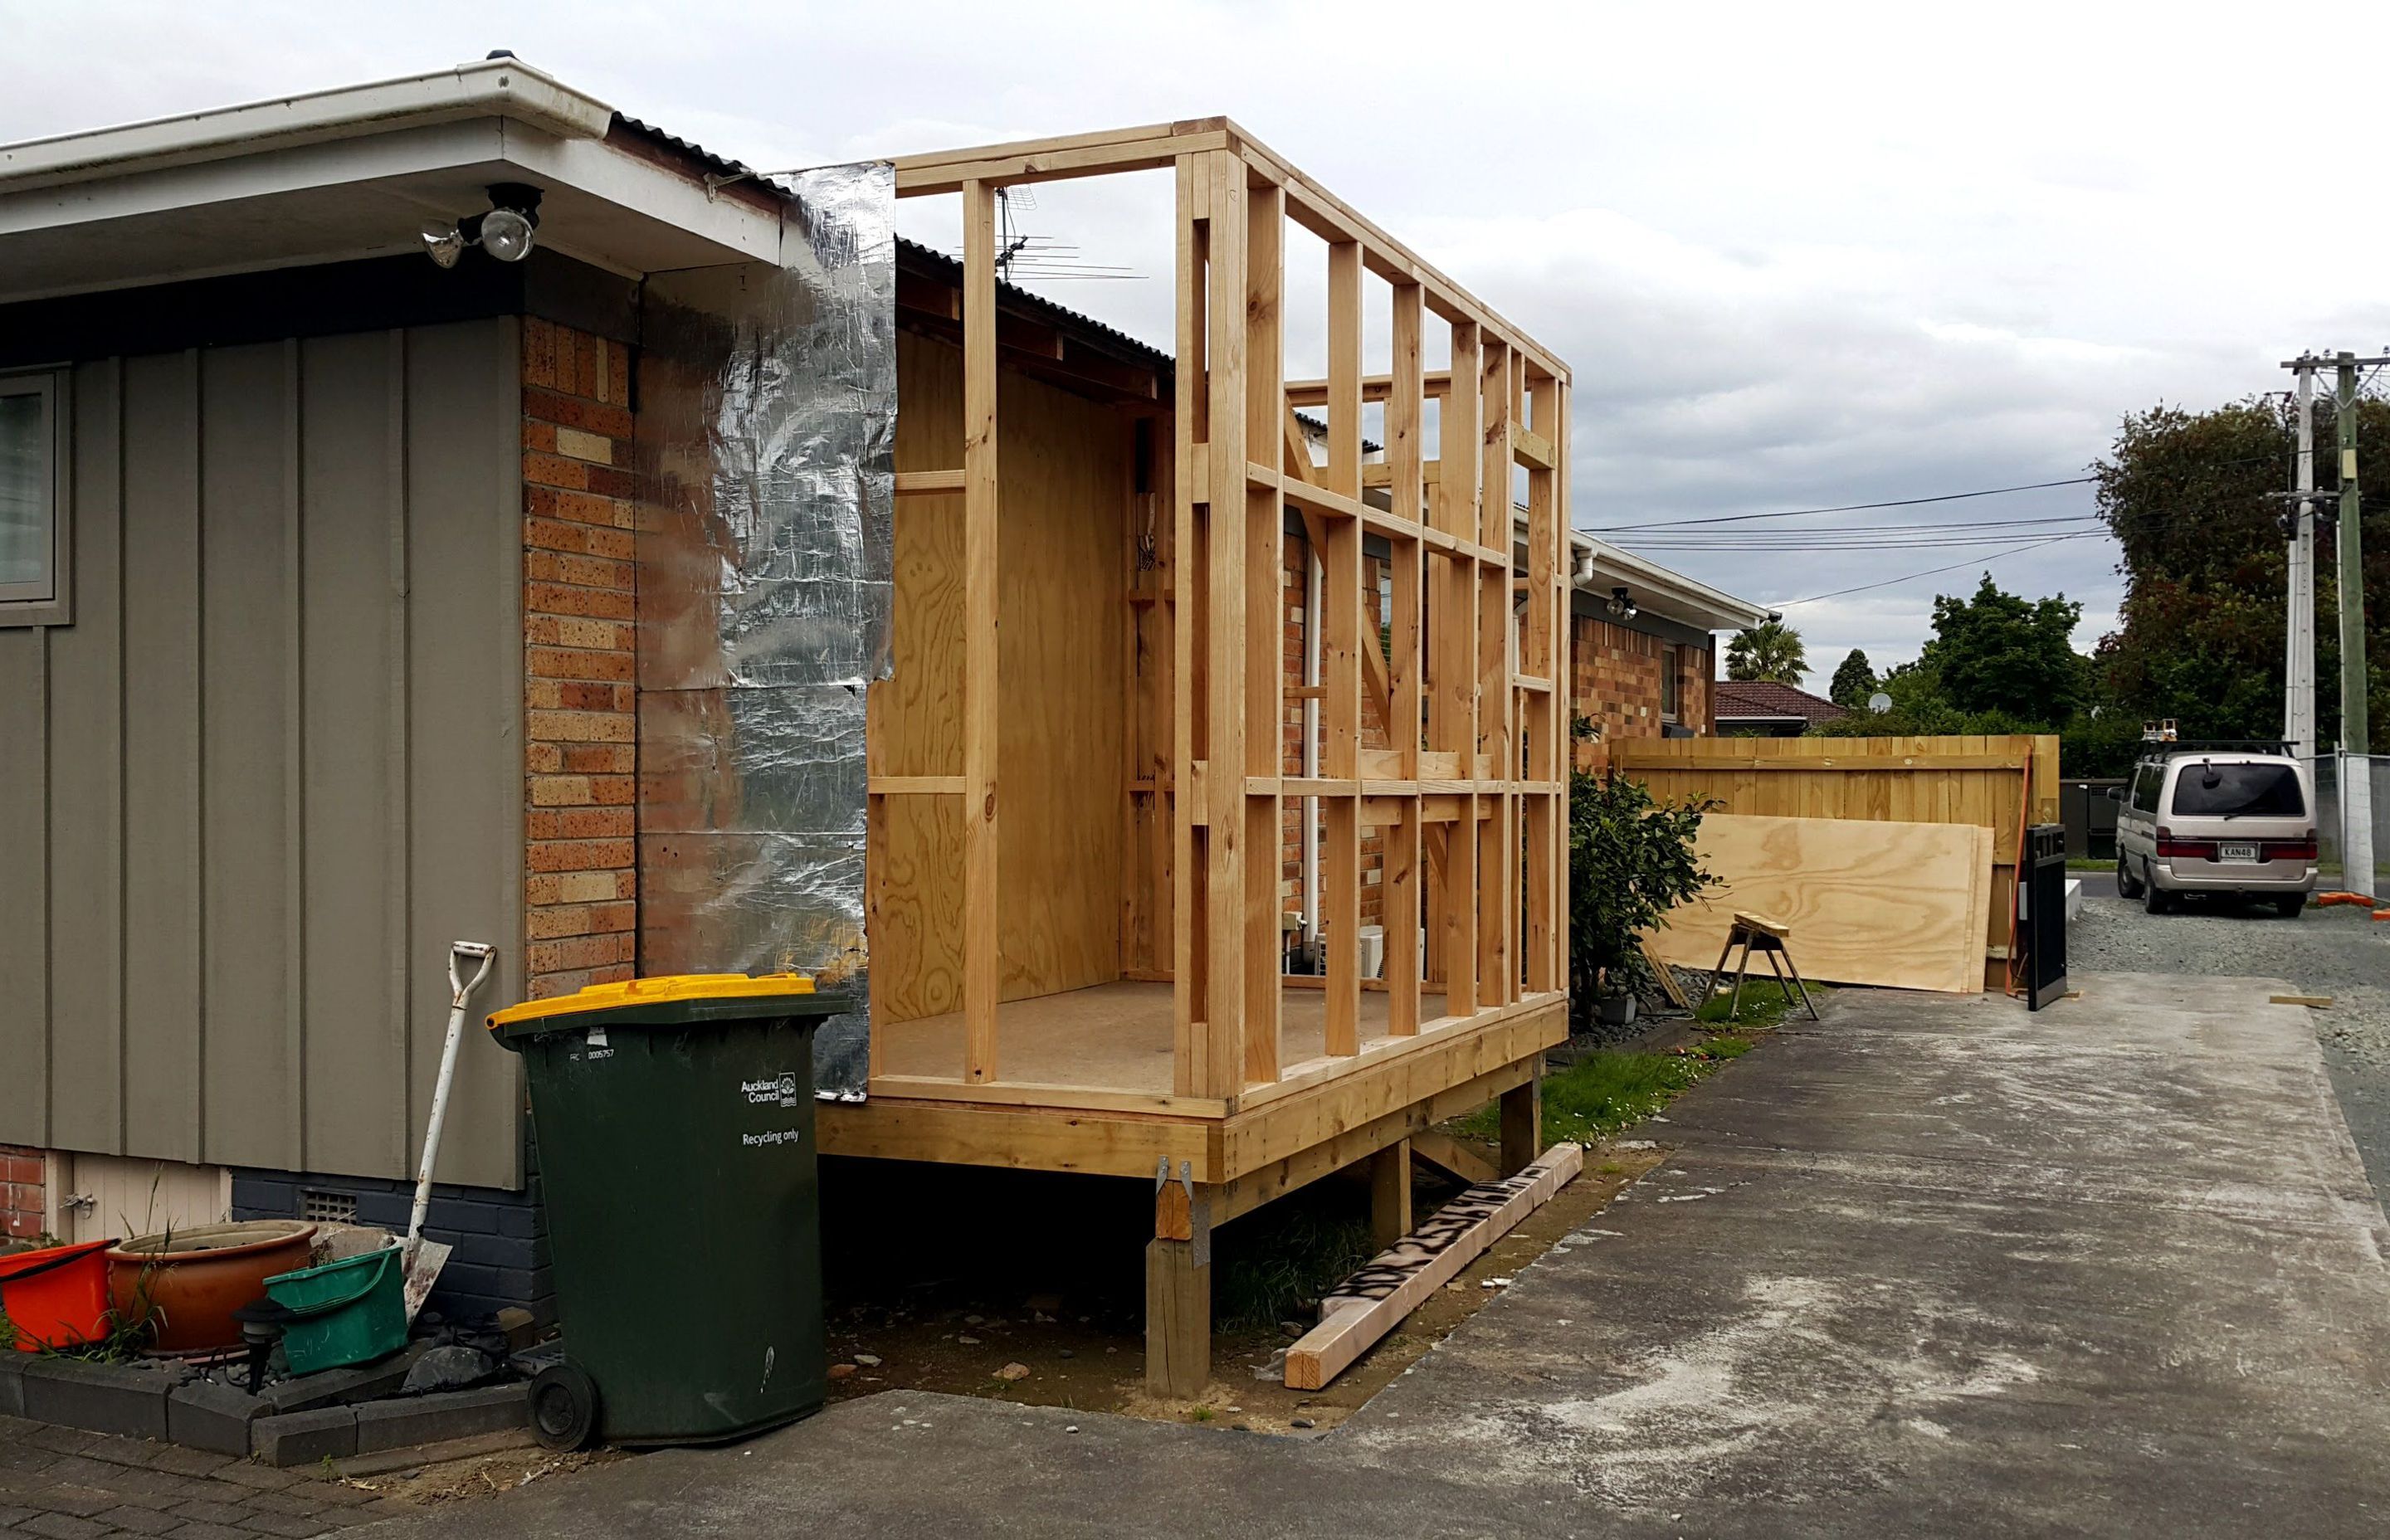 Ensuite Extension - Framing up, ready to build this large new ensuite
